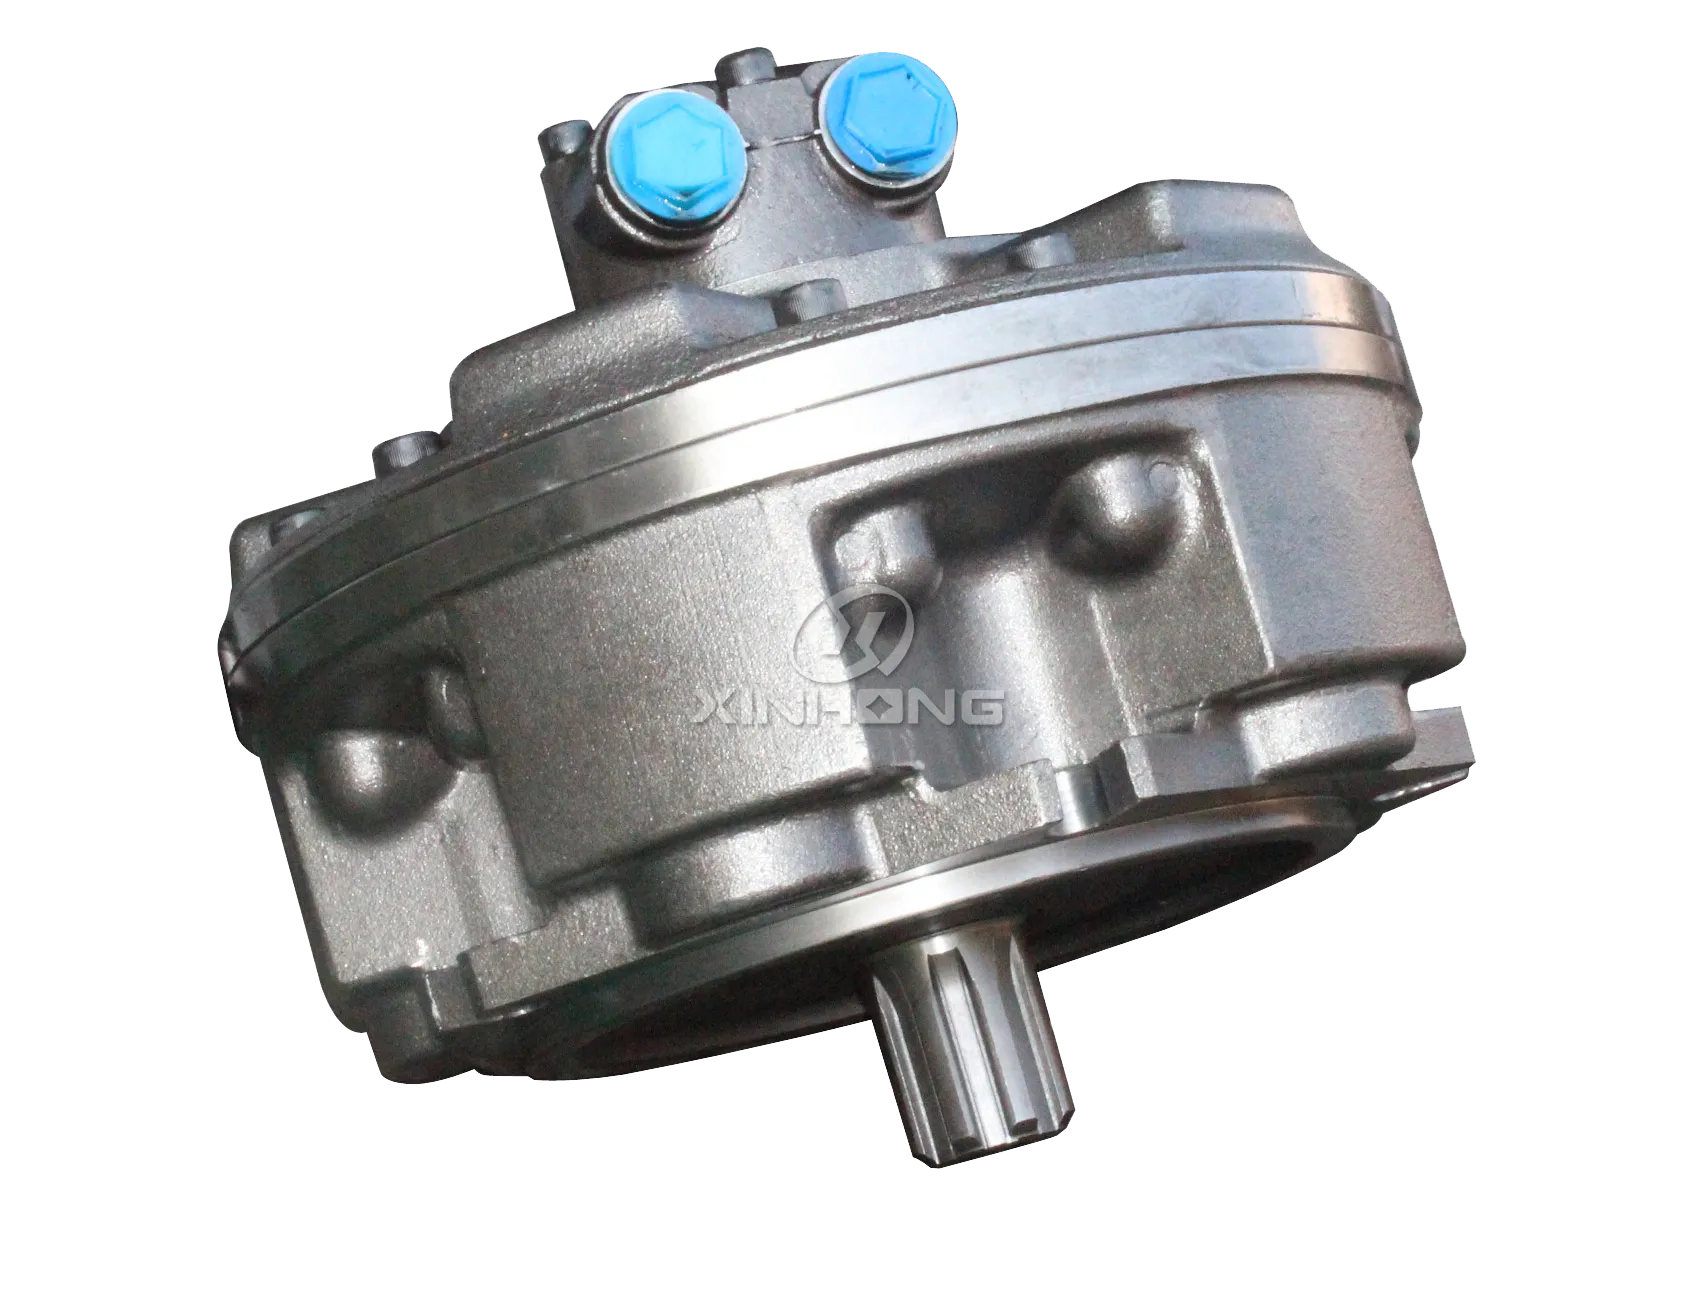 The specification of the hydraulic motor